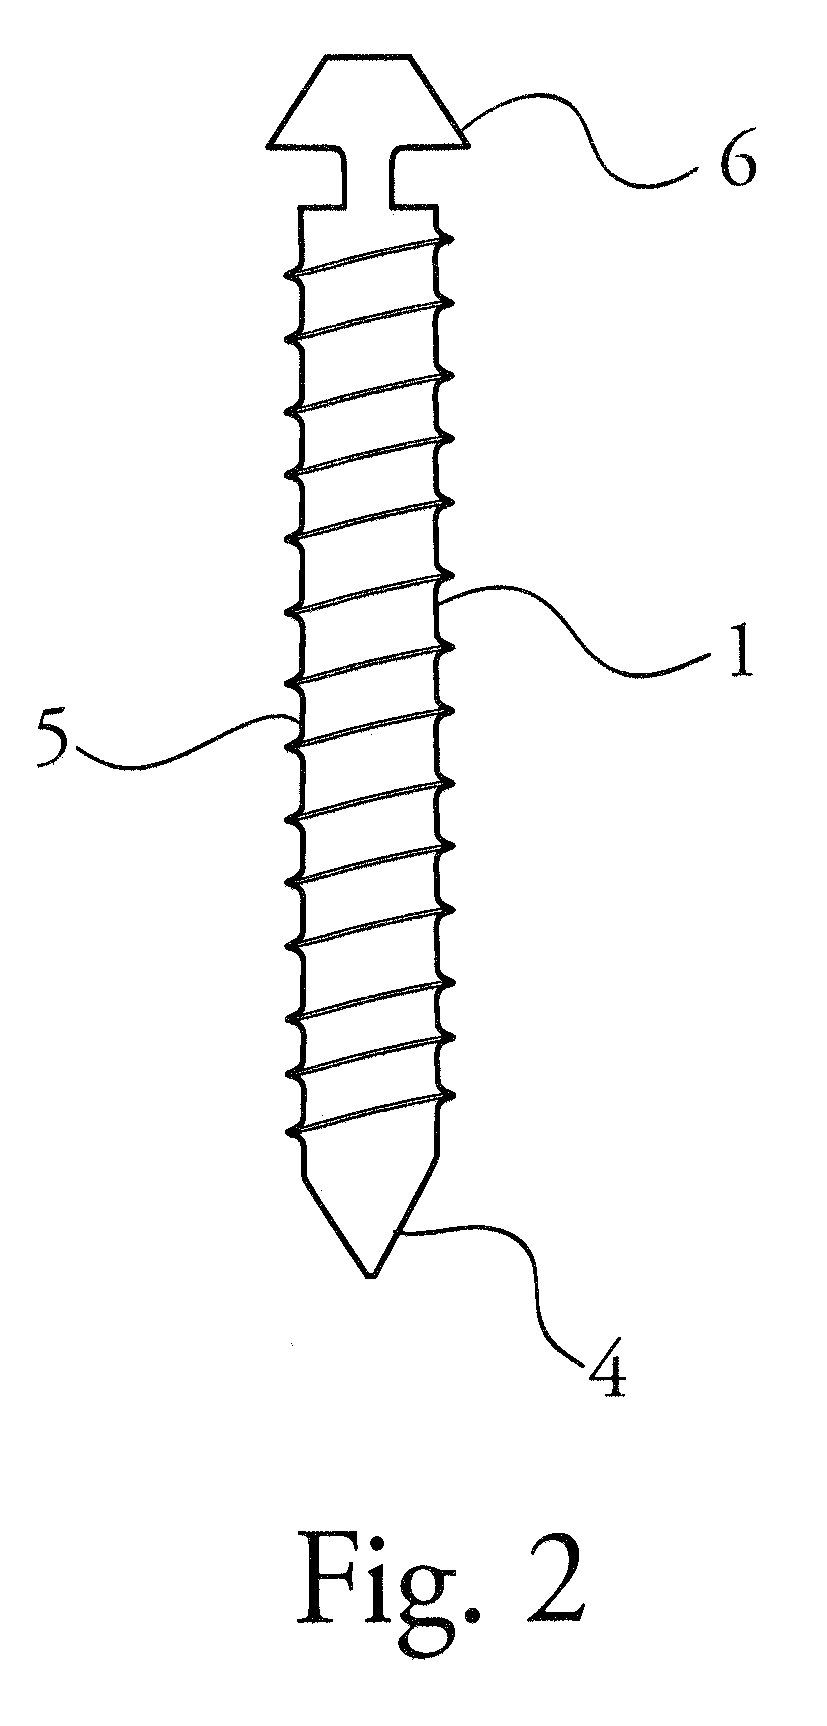 Device and method for implantation that restores physiologic range of motion by establishing an adjustable constrained motion of the spine without intrusion of associated facet joints